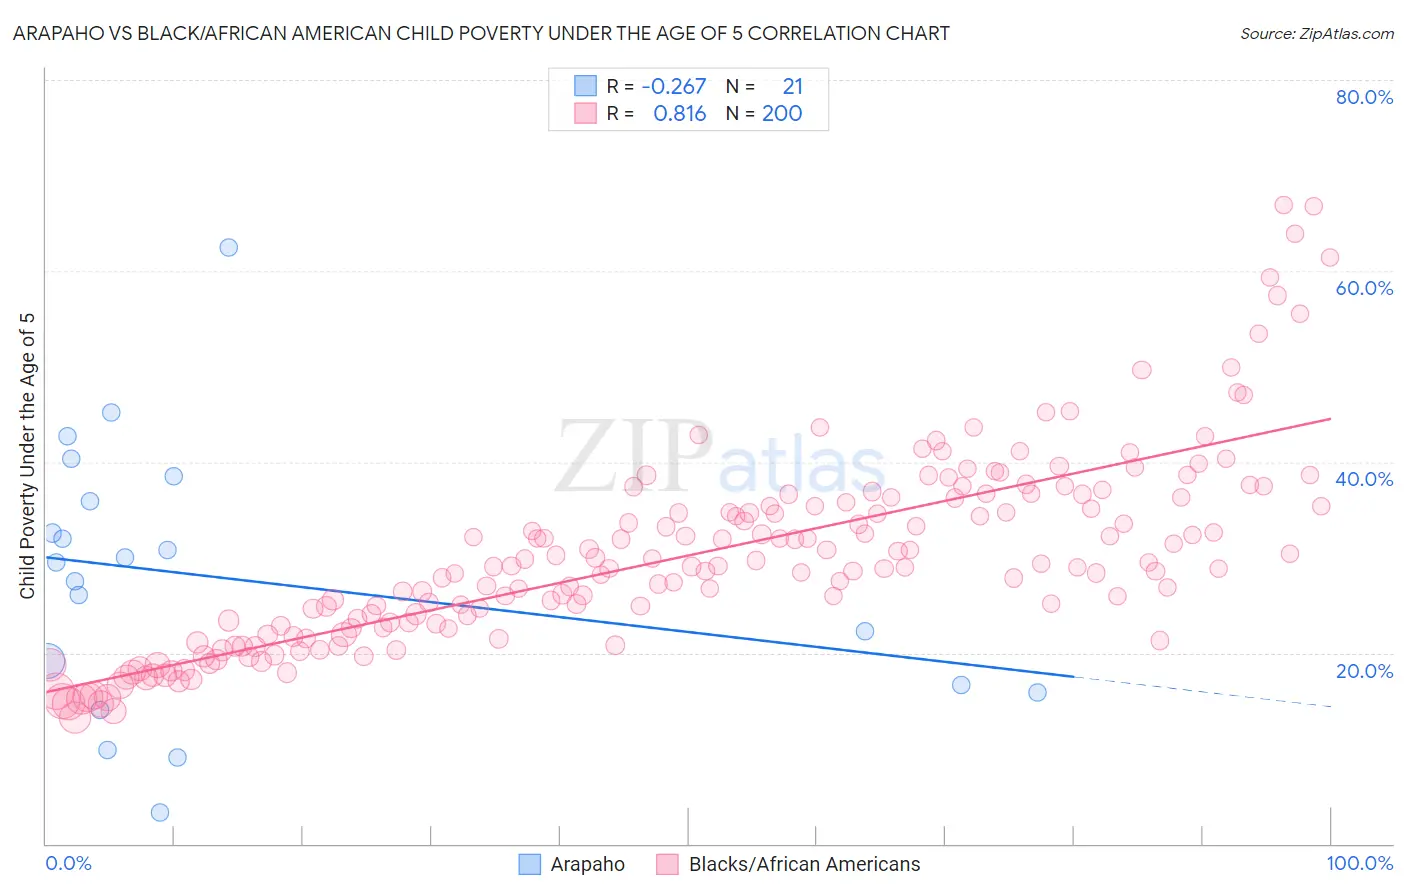 Arapaho vs Black/African American Child Poverty Under the Age of 5